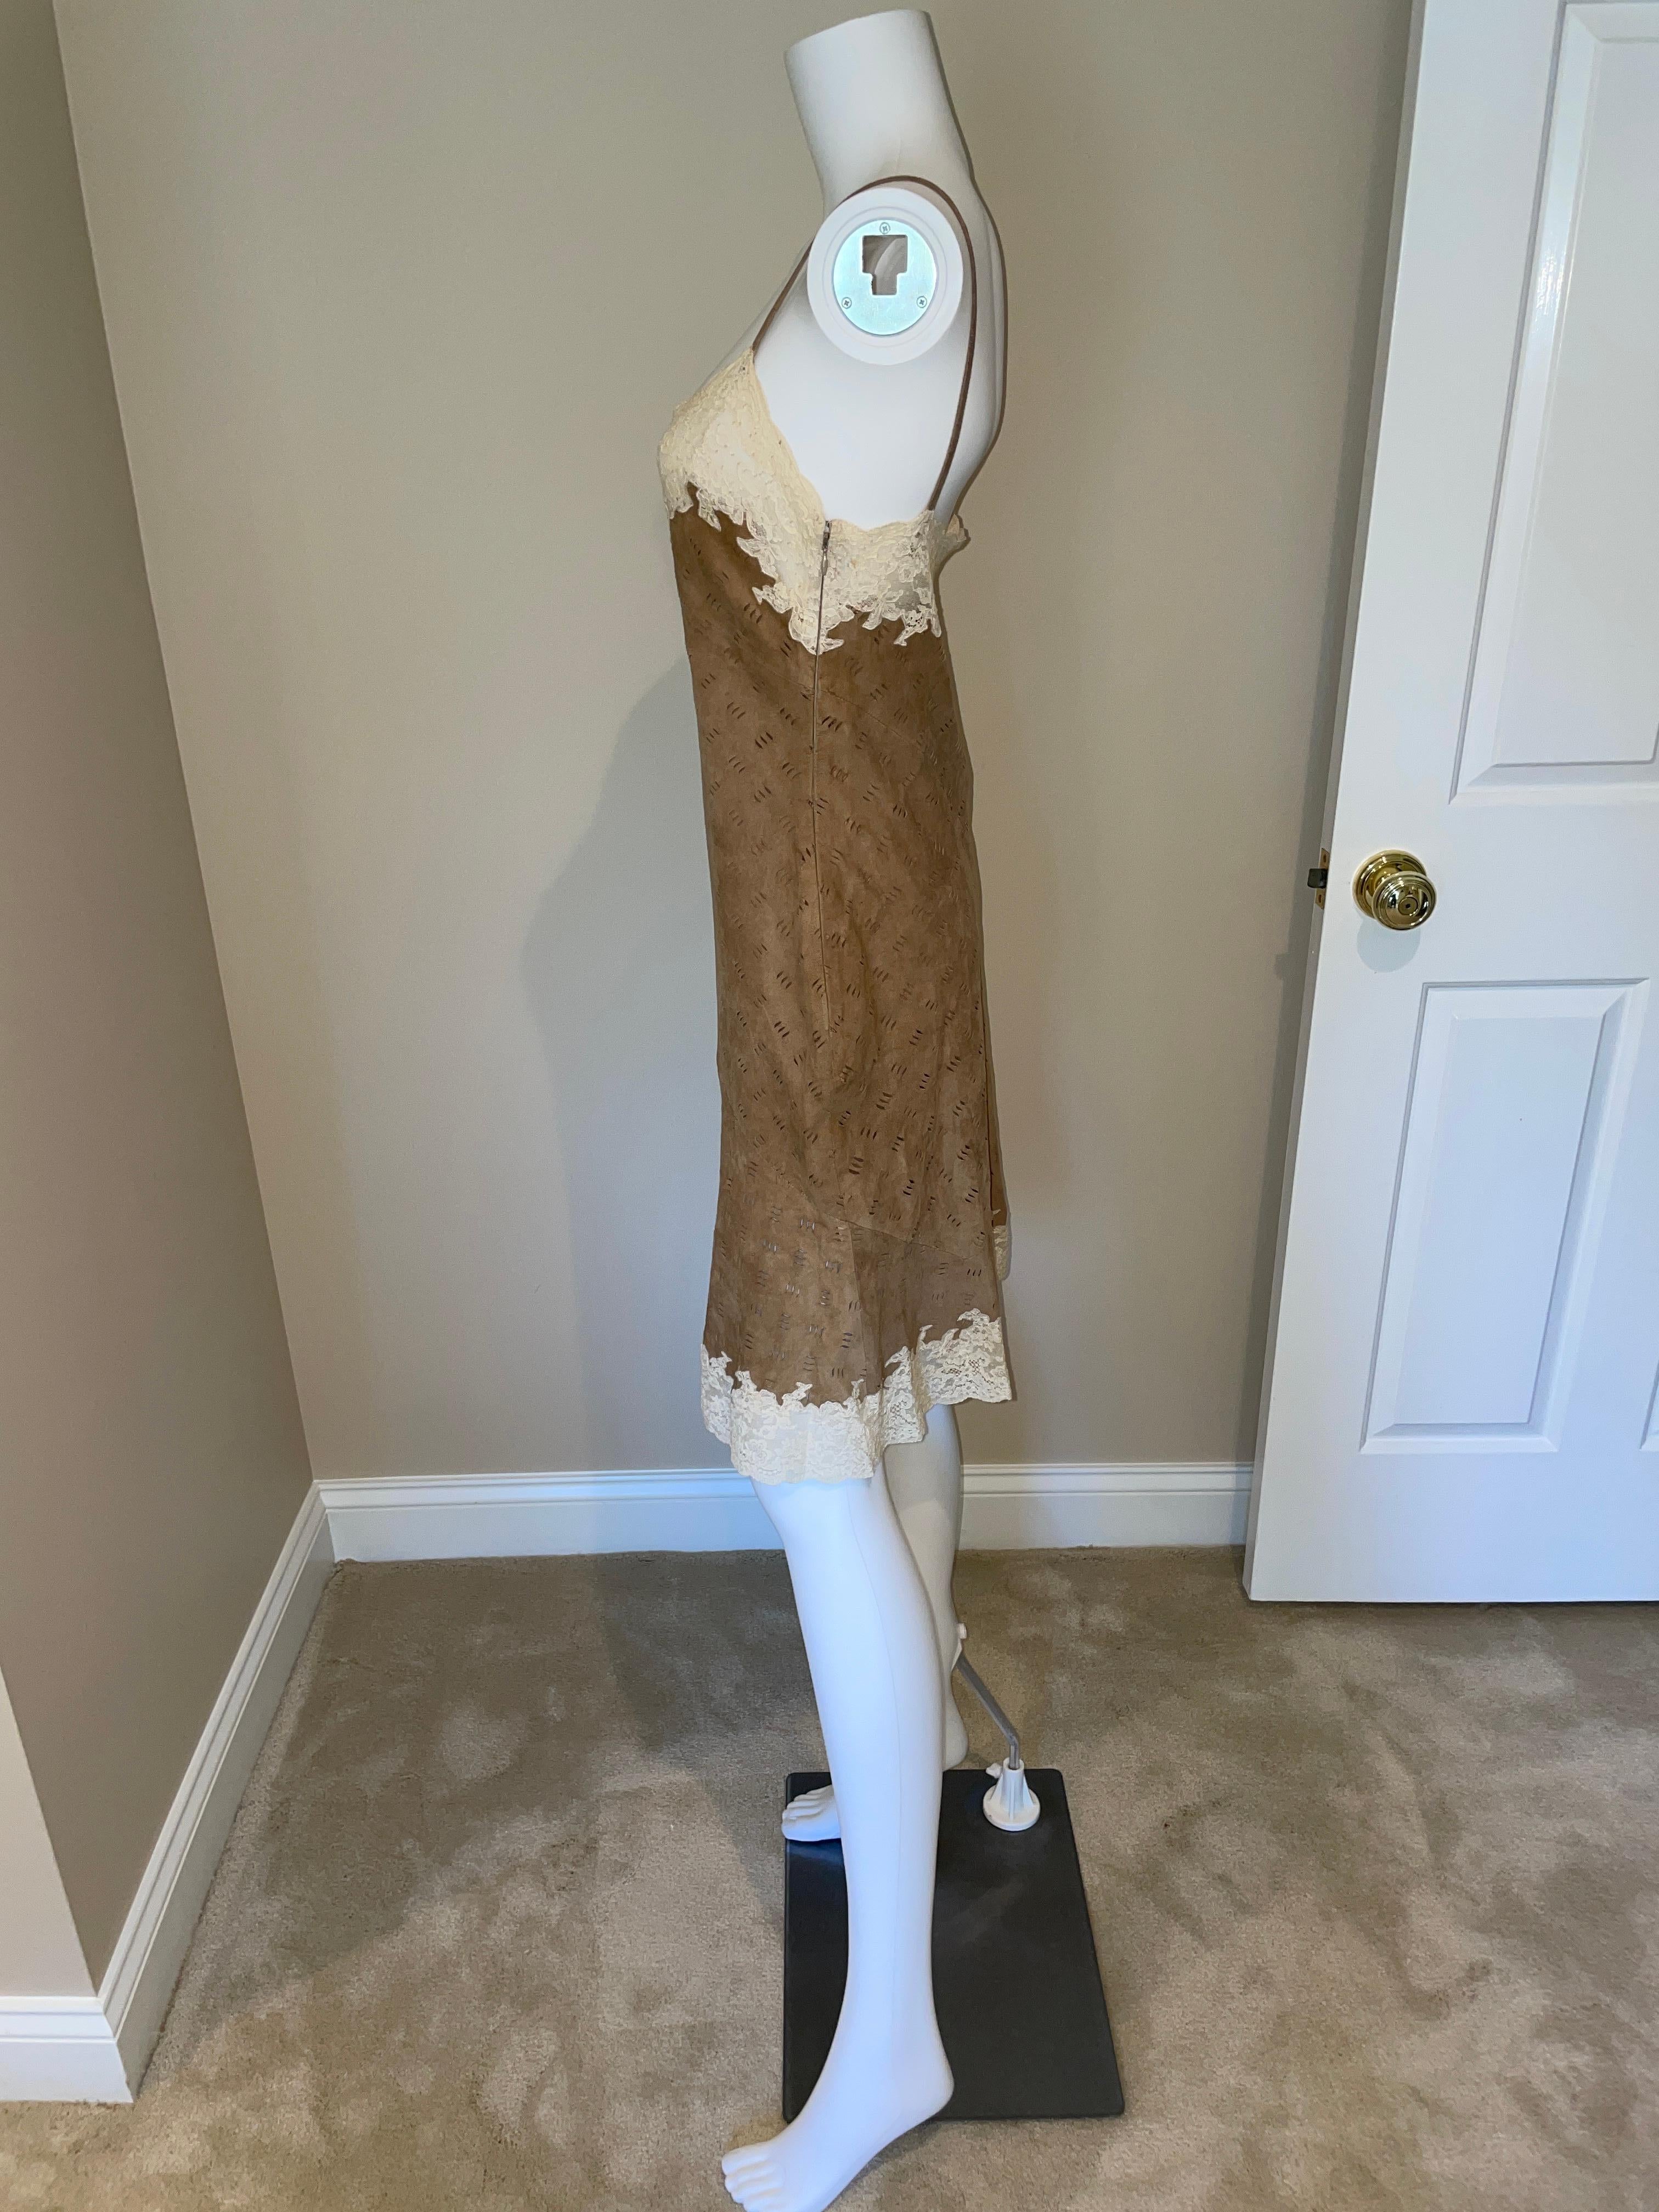 DIOR GALLIANO AW99 suede + lace vintage dress. 
1999 Vintage Christian Dior John Galliano Era knee length dress. Made from brown laser cut suede and cream lace. Size F40. Excellent used vintage condition. There is some minor wear to the fabric, but